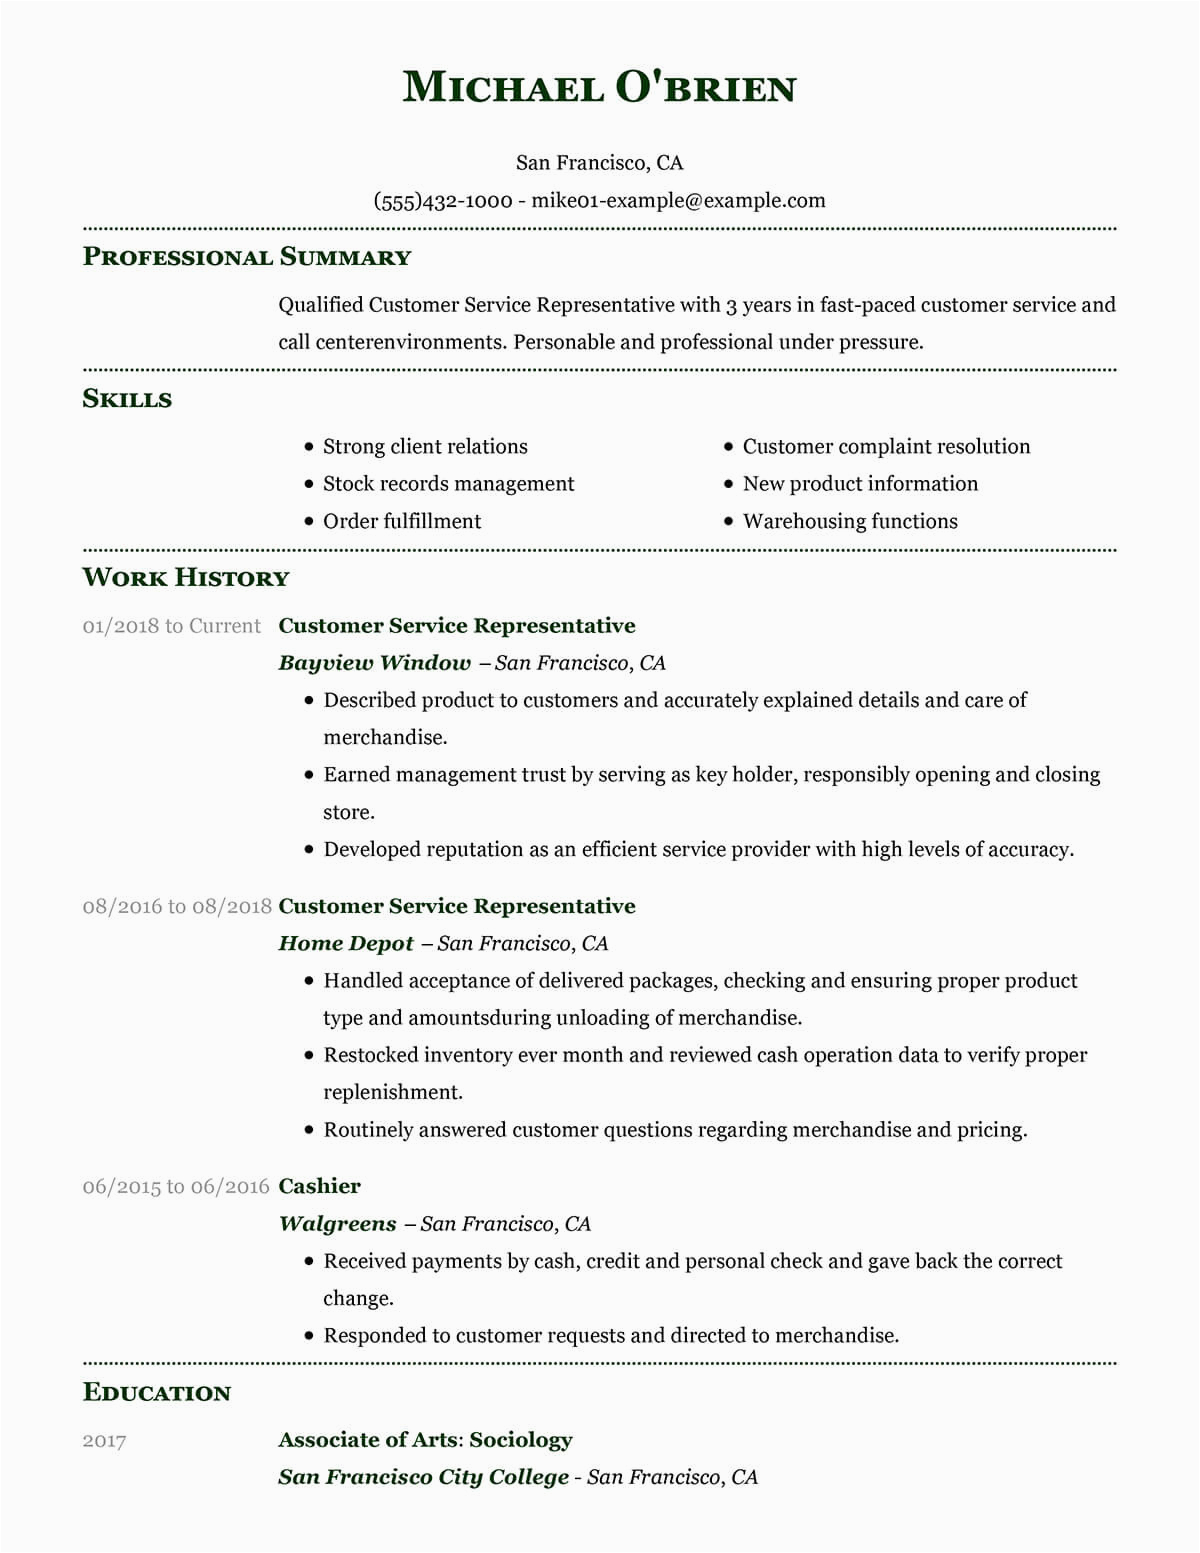 Free Sample Resume for Customer Service Representative Customize Our 1 Customer Representative Resume Example